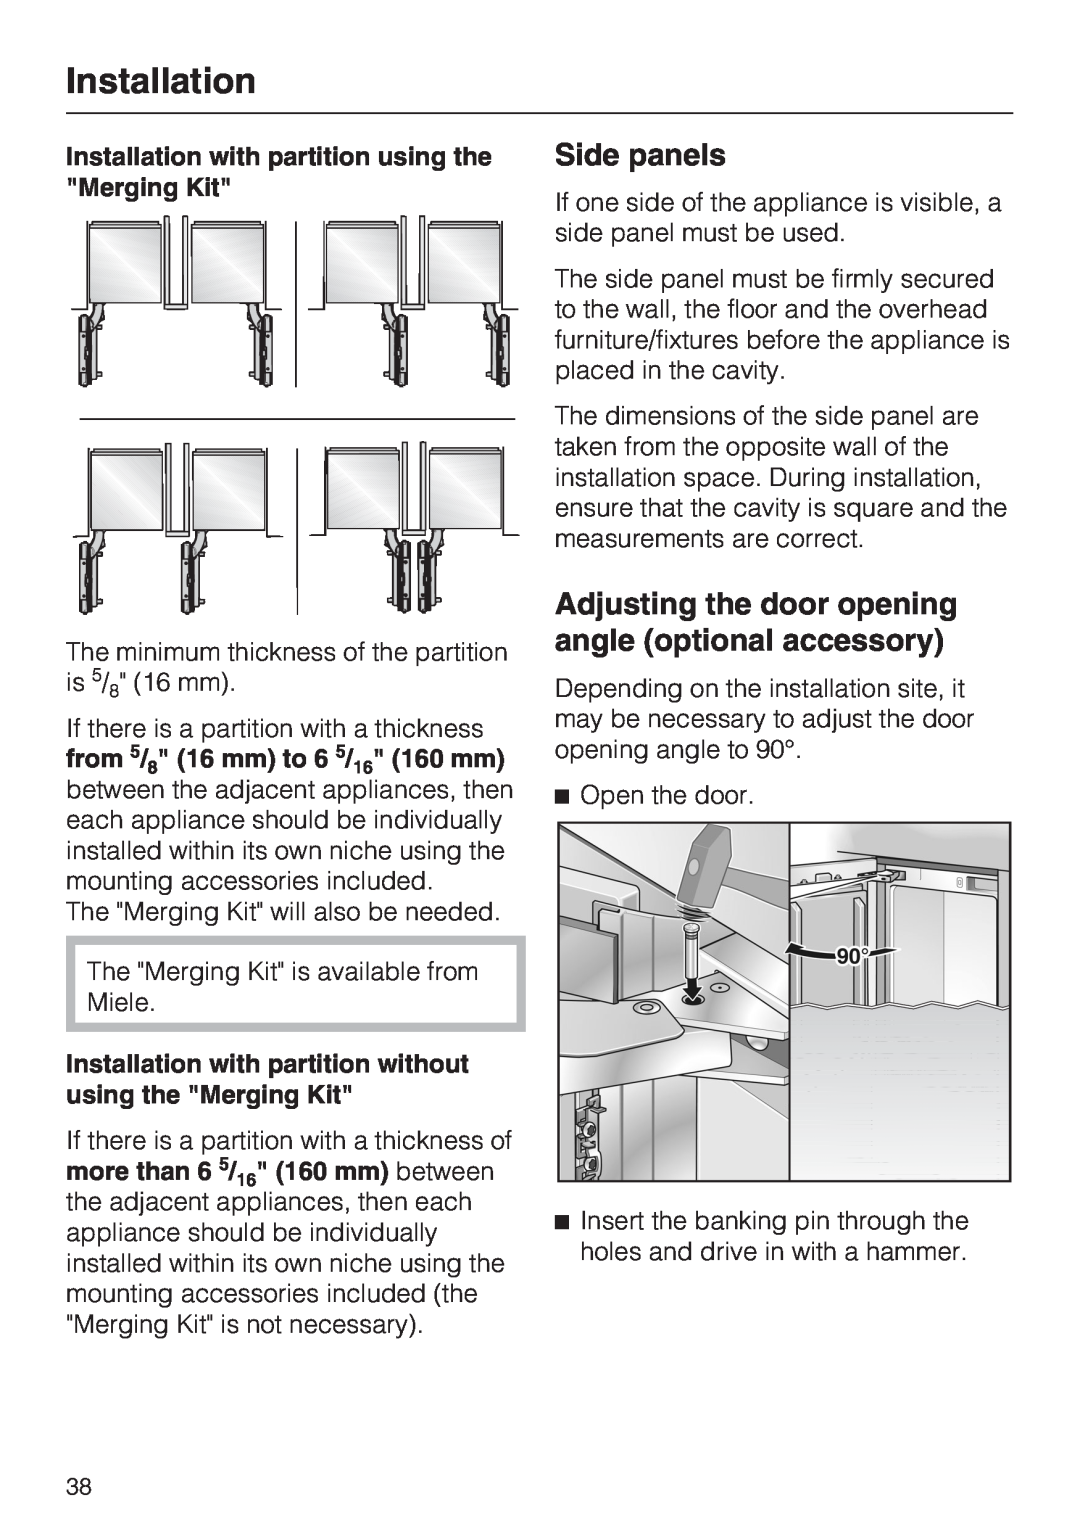 Miele KWT1611VI Side panels, Adjusting the door opening angle optional accessory, from 5/8 16 mm to 6 5/16 160 mm 